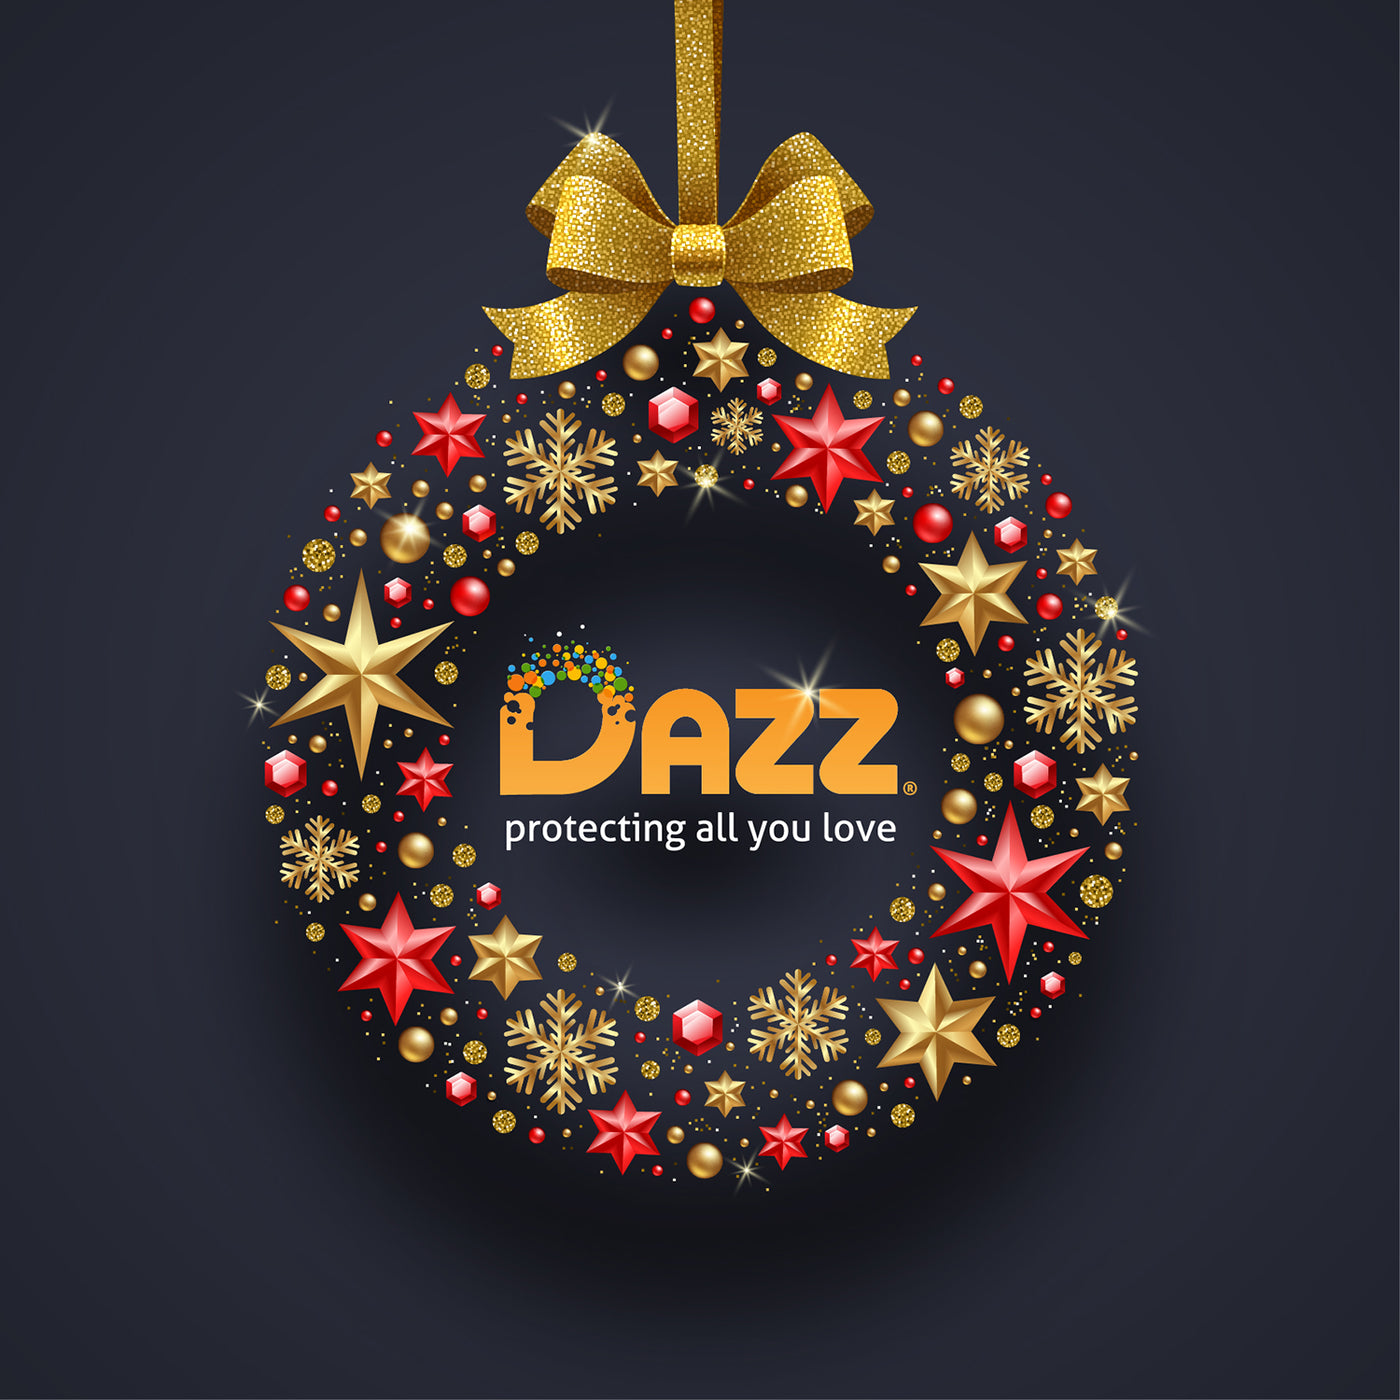 Happy New Year from the DAZZ Family